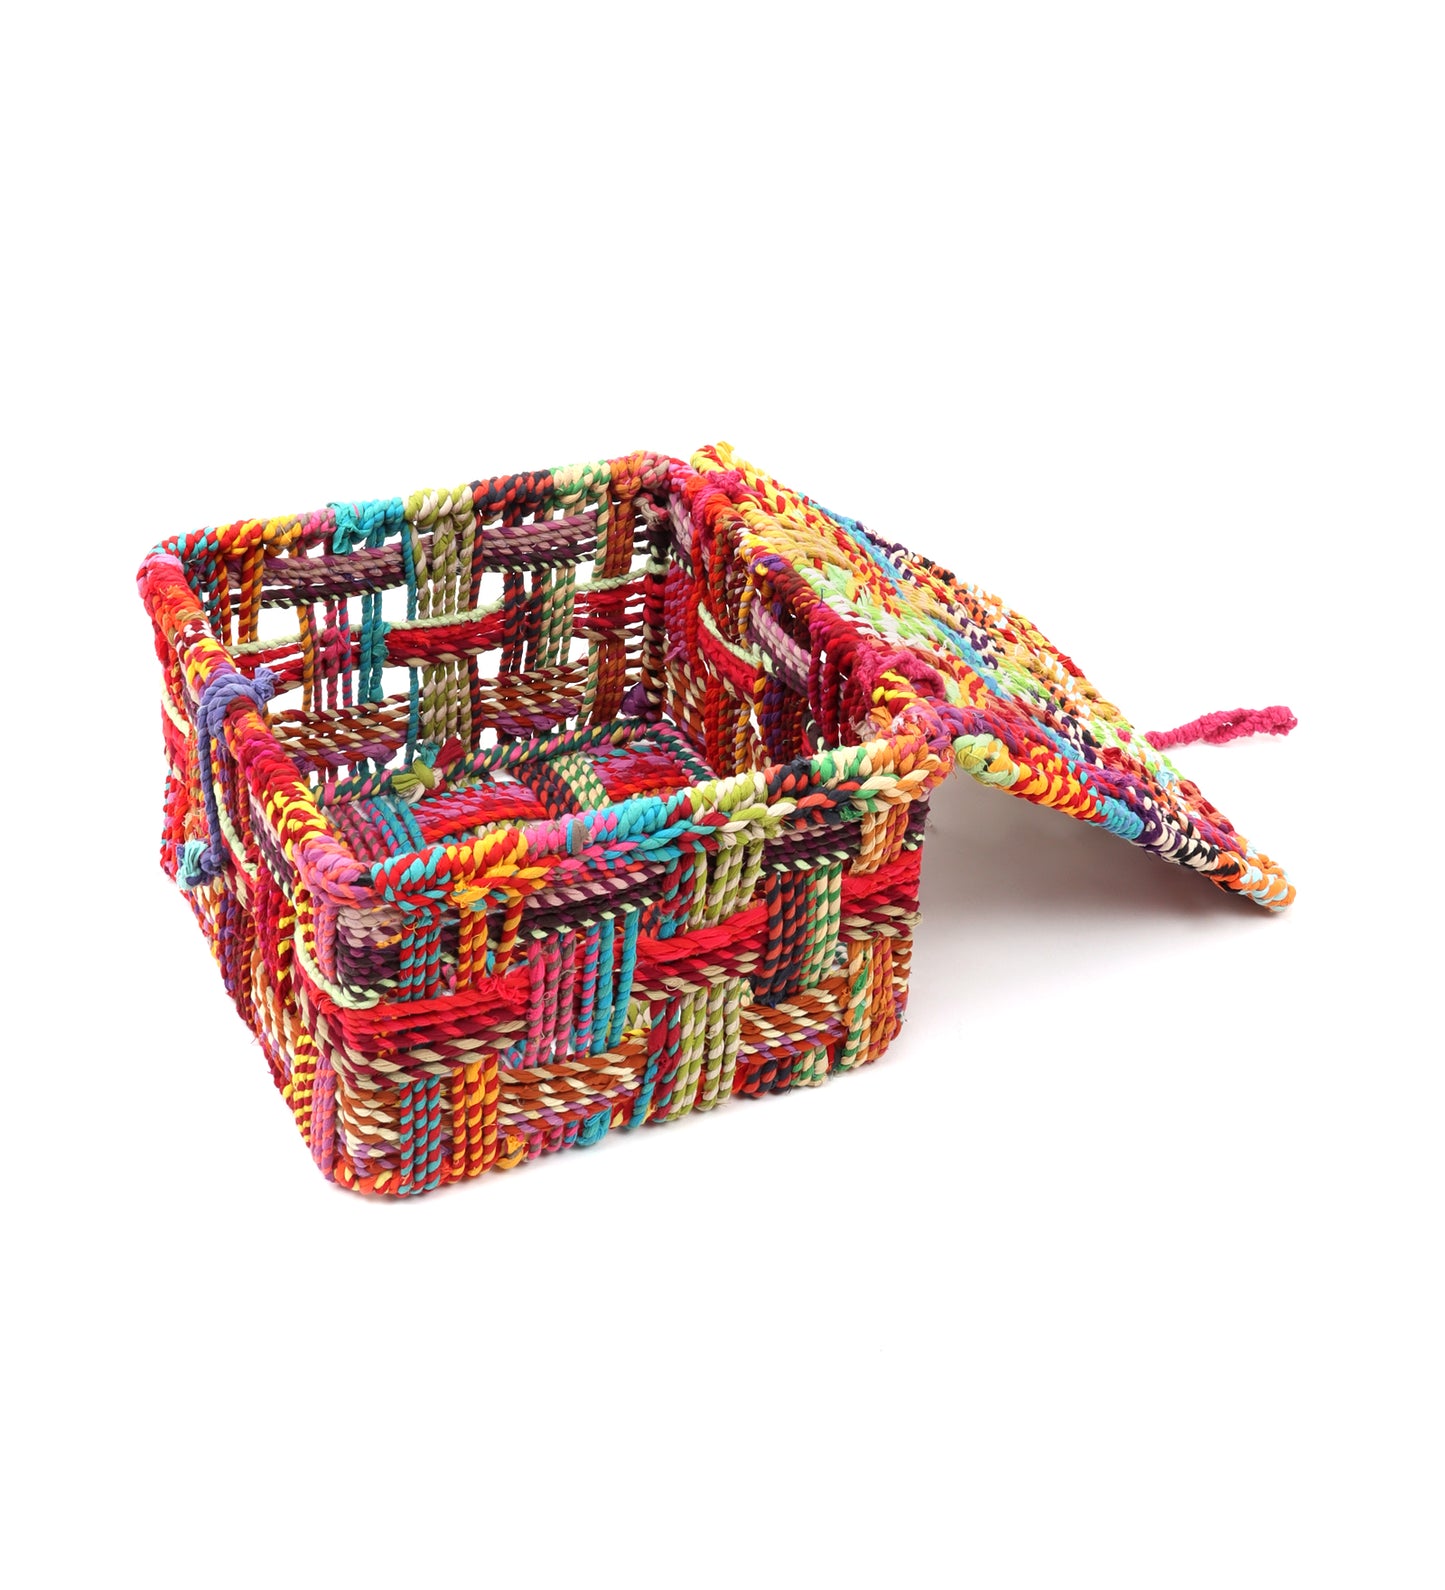 Cotton Rope Basket Multi Lid (Small)